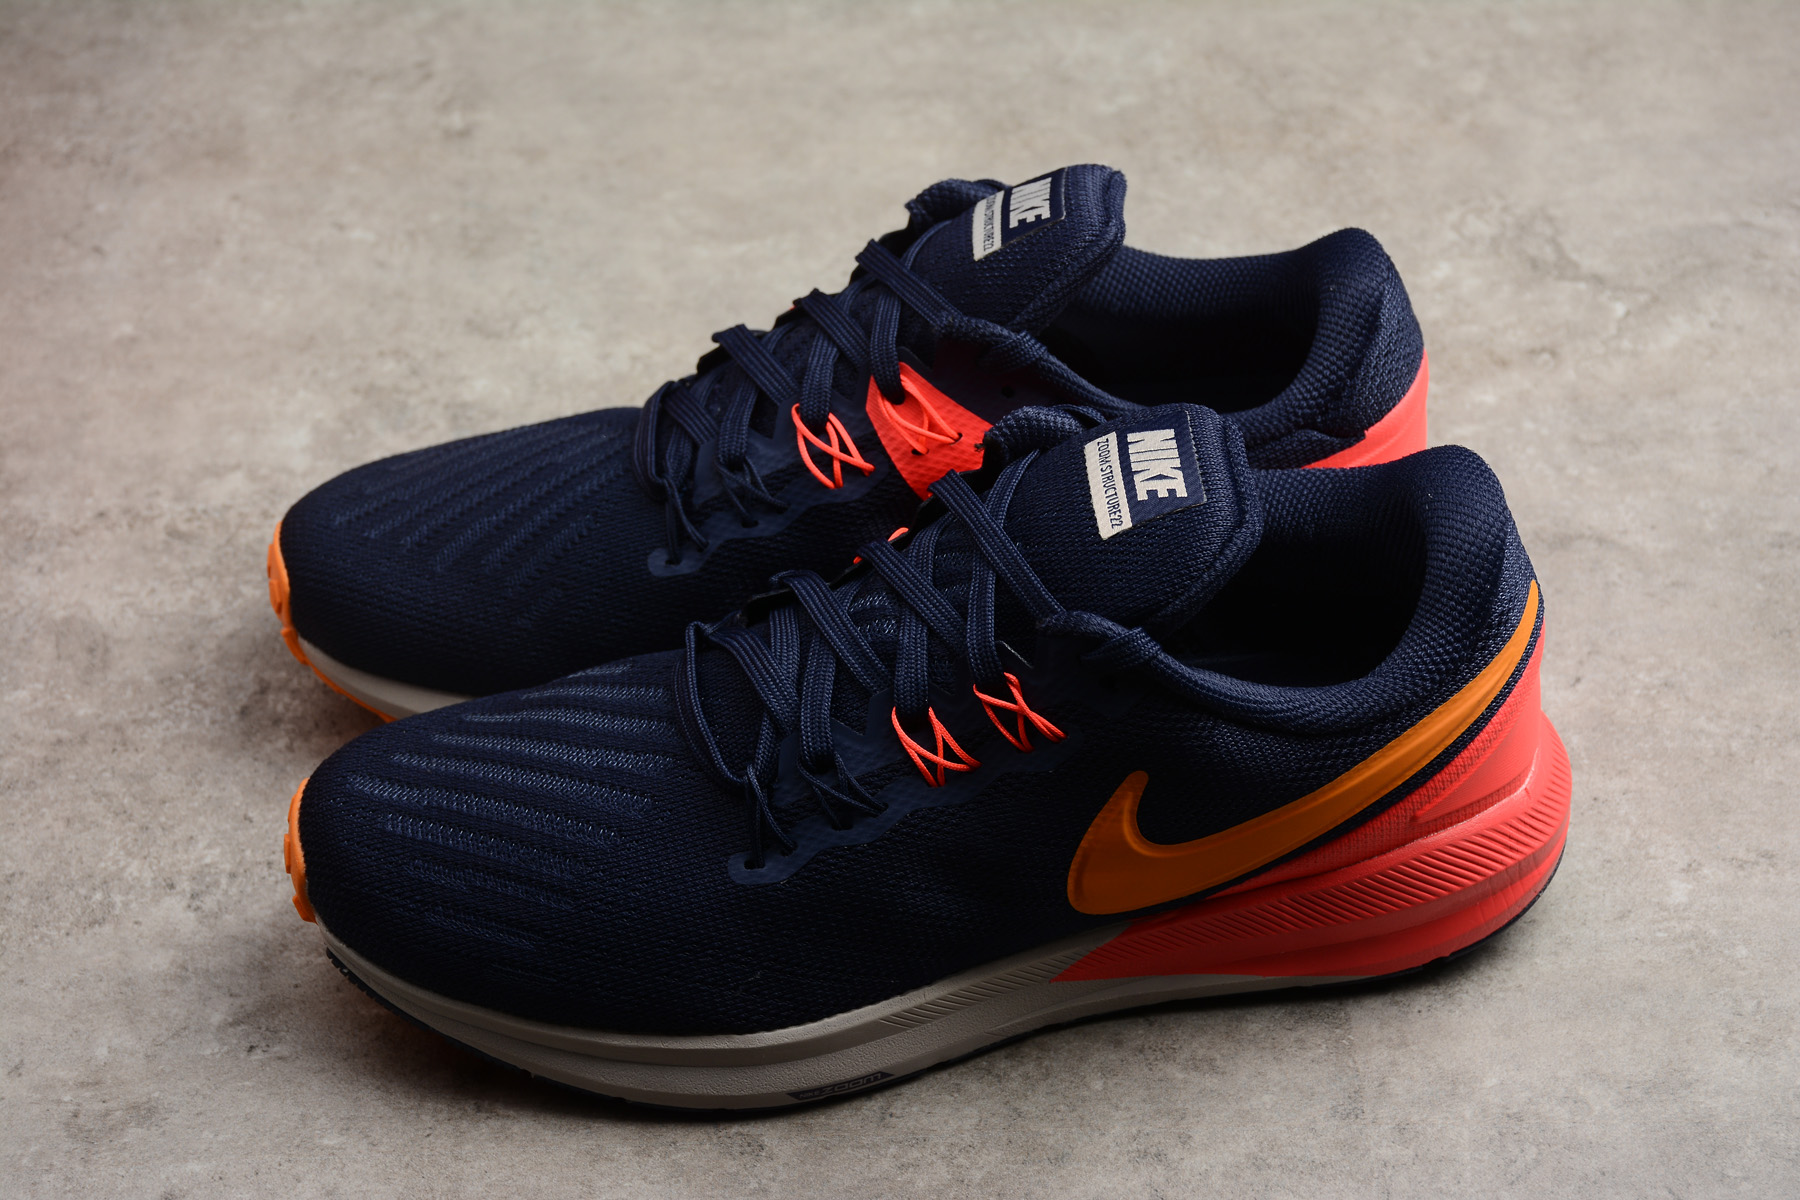 Nike Air Zoom Structure 22 Royal Blue Orange Shoes